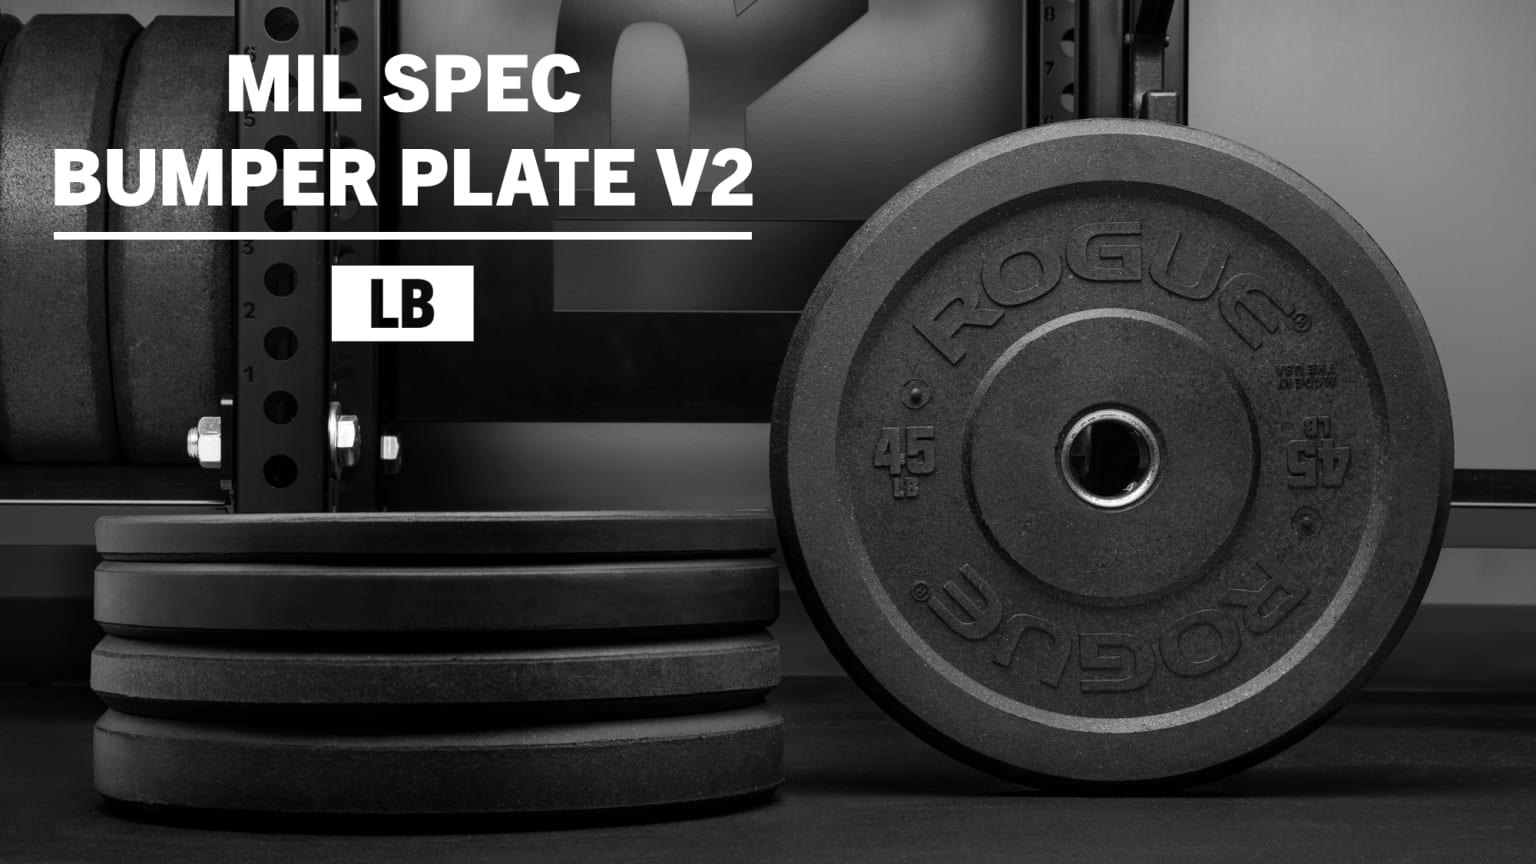 Set of 2 Details about   ROGUE Fleck Bumper Plates 45 lb PAIR *NEW* In Hand Ships Fast 